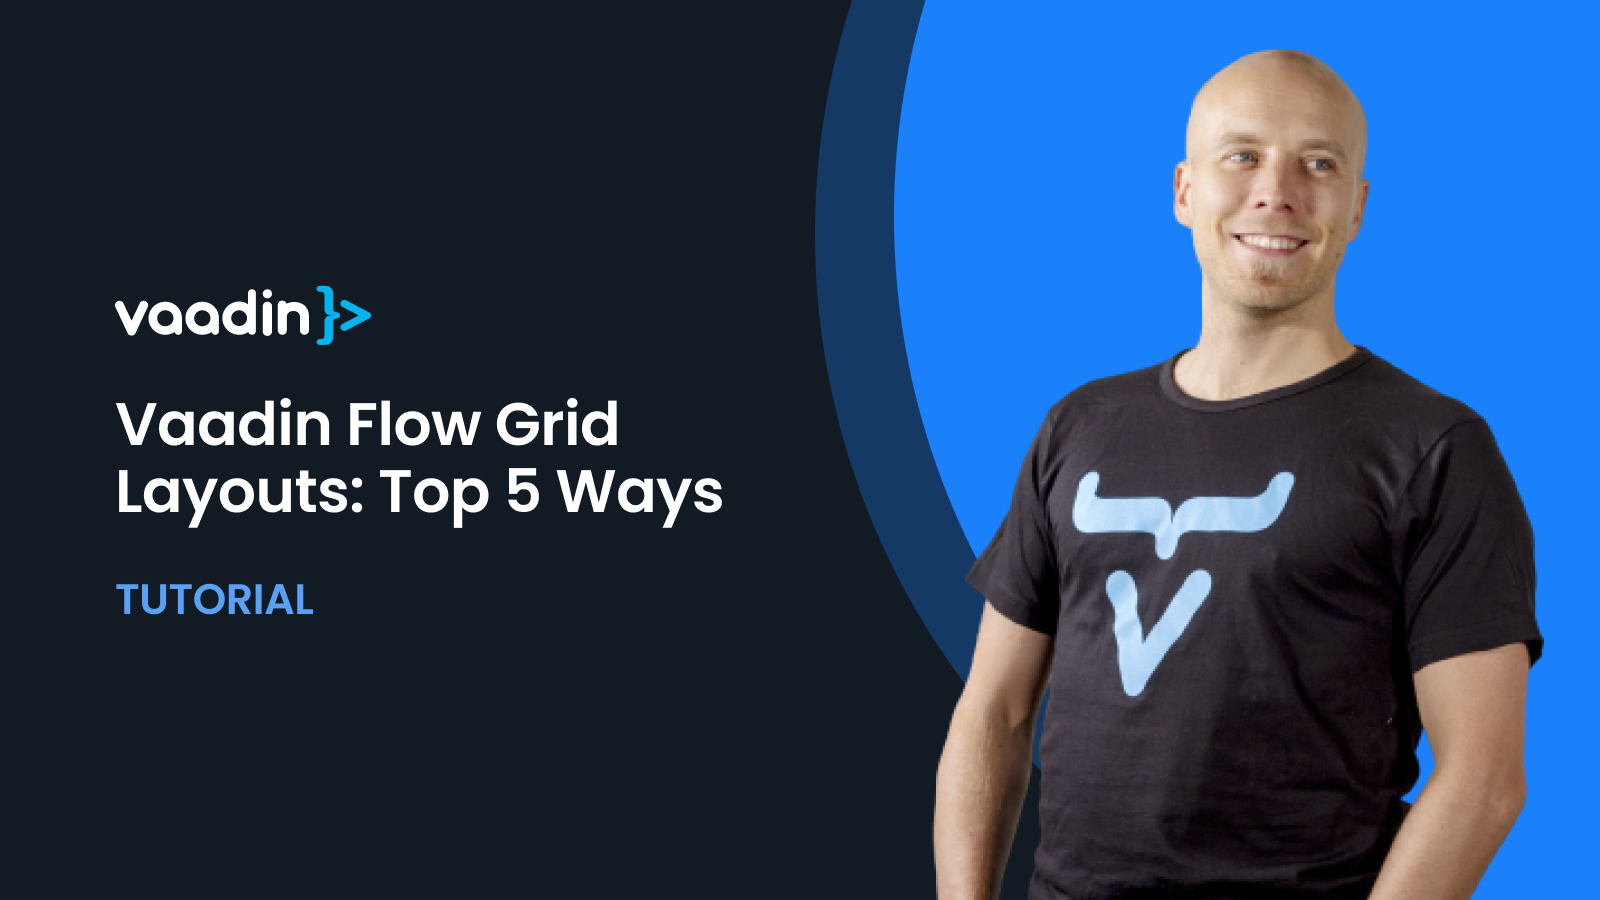 Explore top ways for creating grid layouts in Vaadin Flow, including add-ons, HTML tables, Bootstrap-like solutions, and CSS Grid for optimal performance.